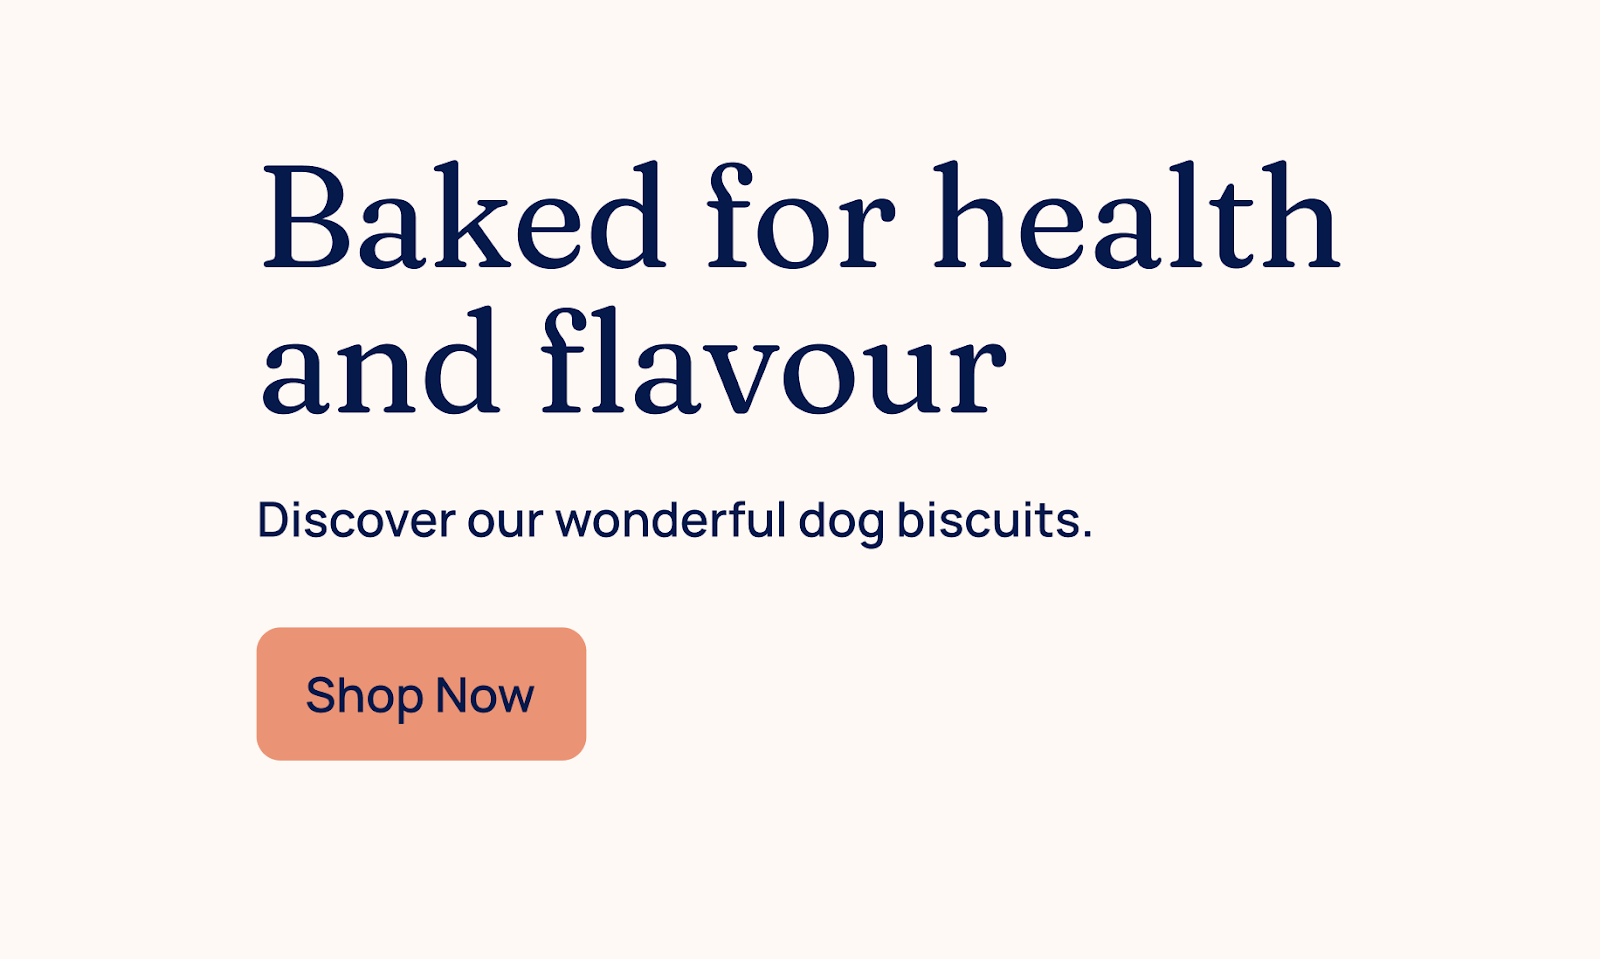 Screenshot of CTA example, text 'Baked for health and flavour' with subheadinf and CTA button showing 'shop now'.